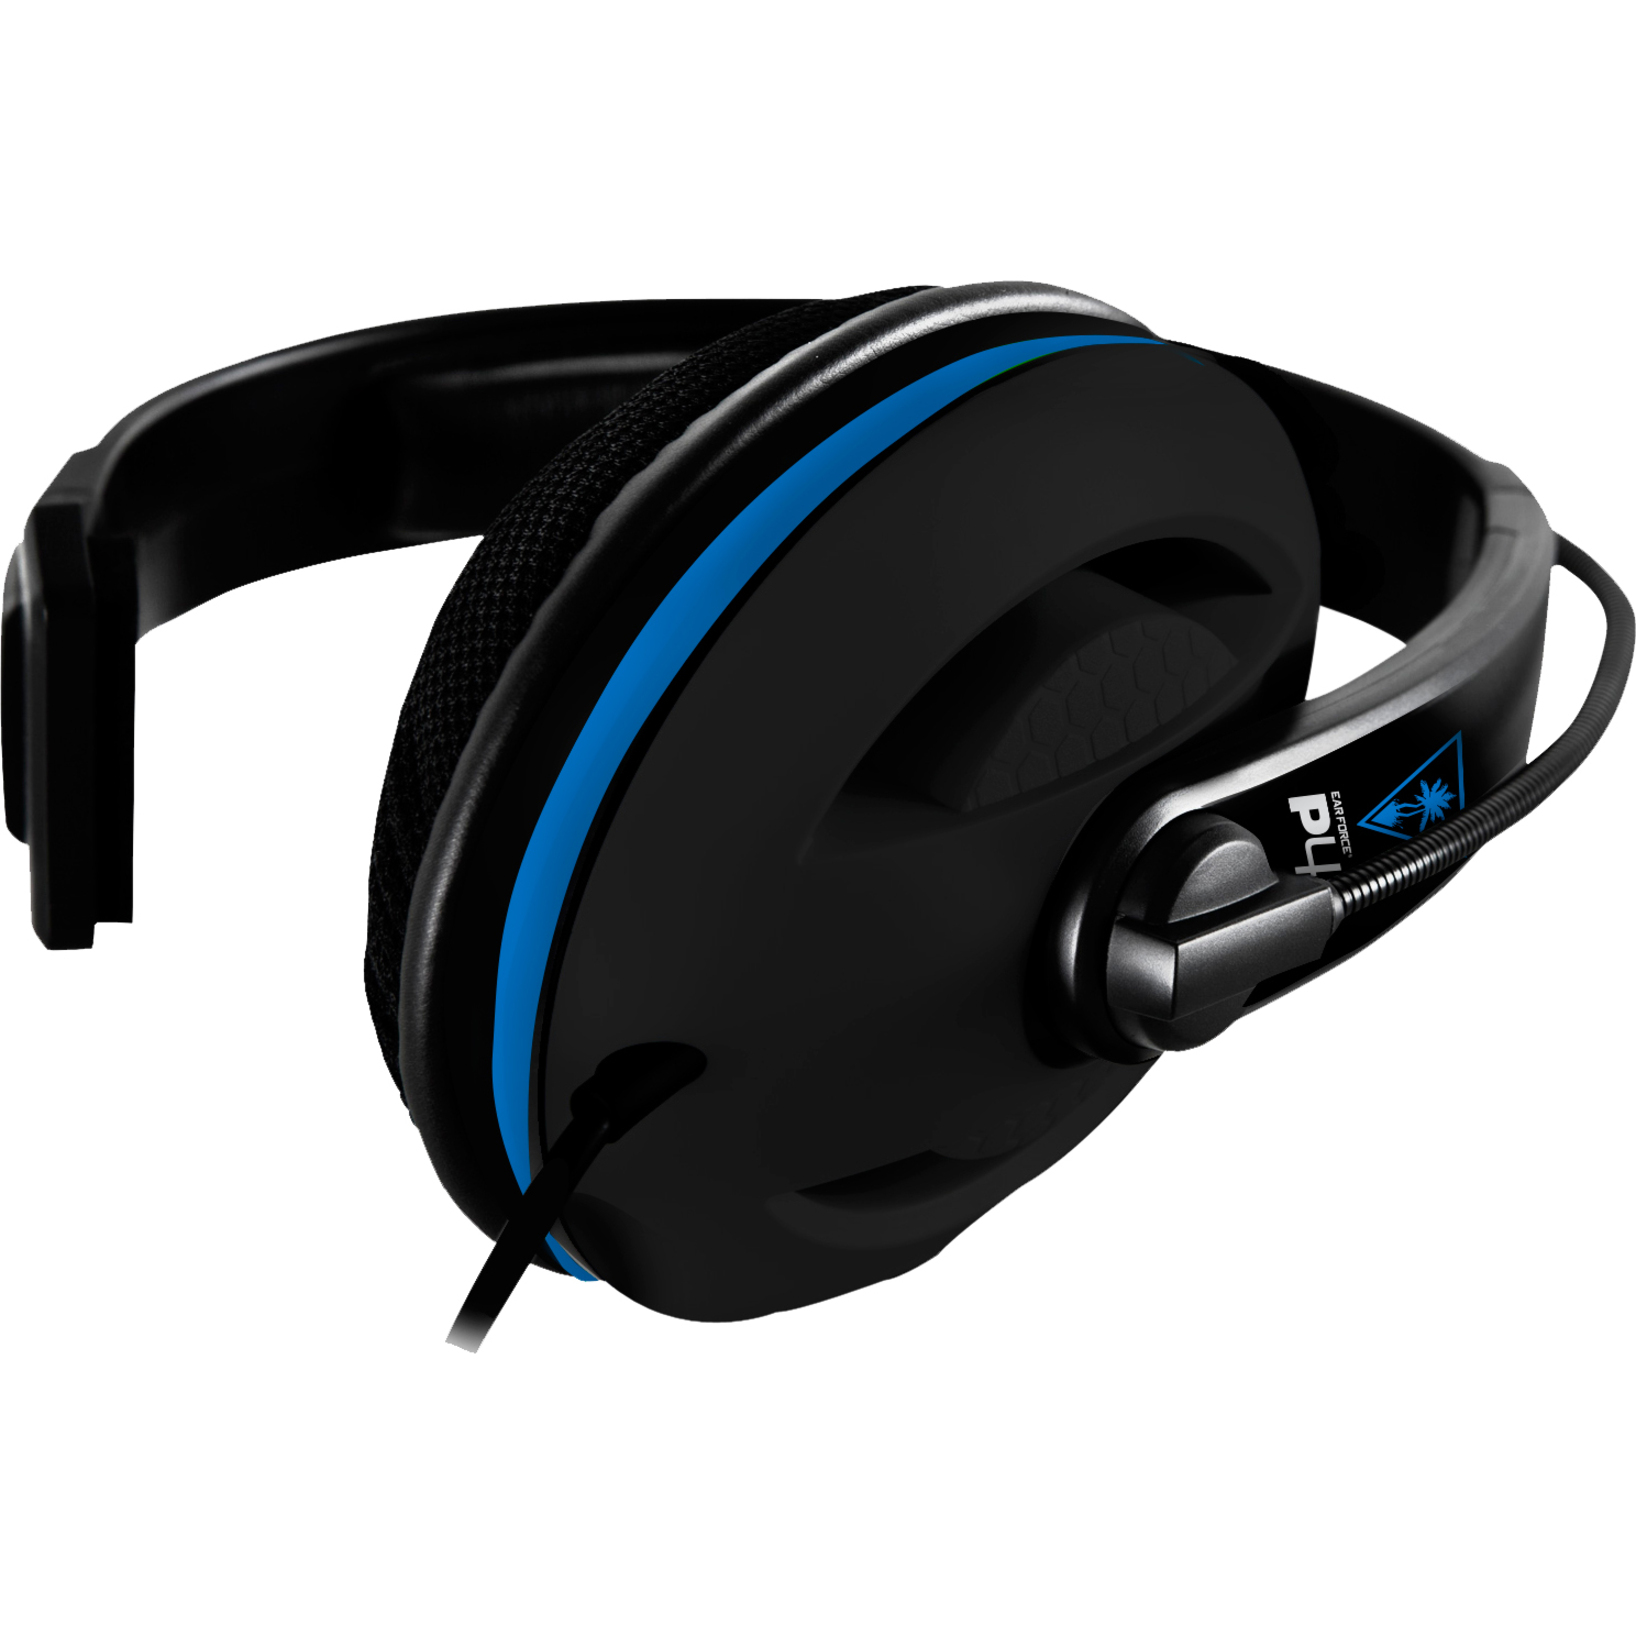 Turtle Beach Ear Force P4c Chat Communicator - Headset - full size - image 2 of 4